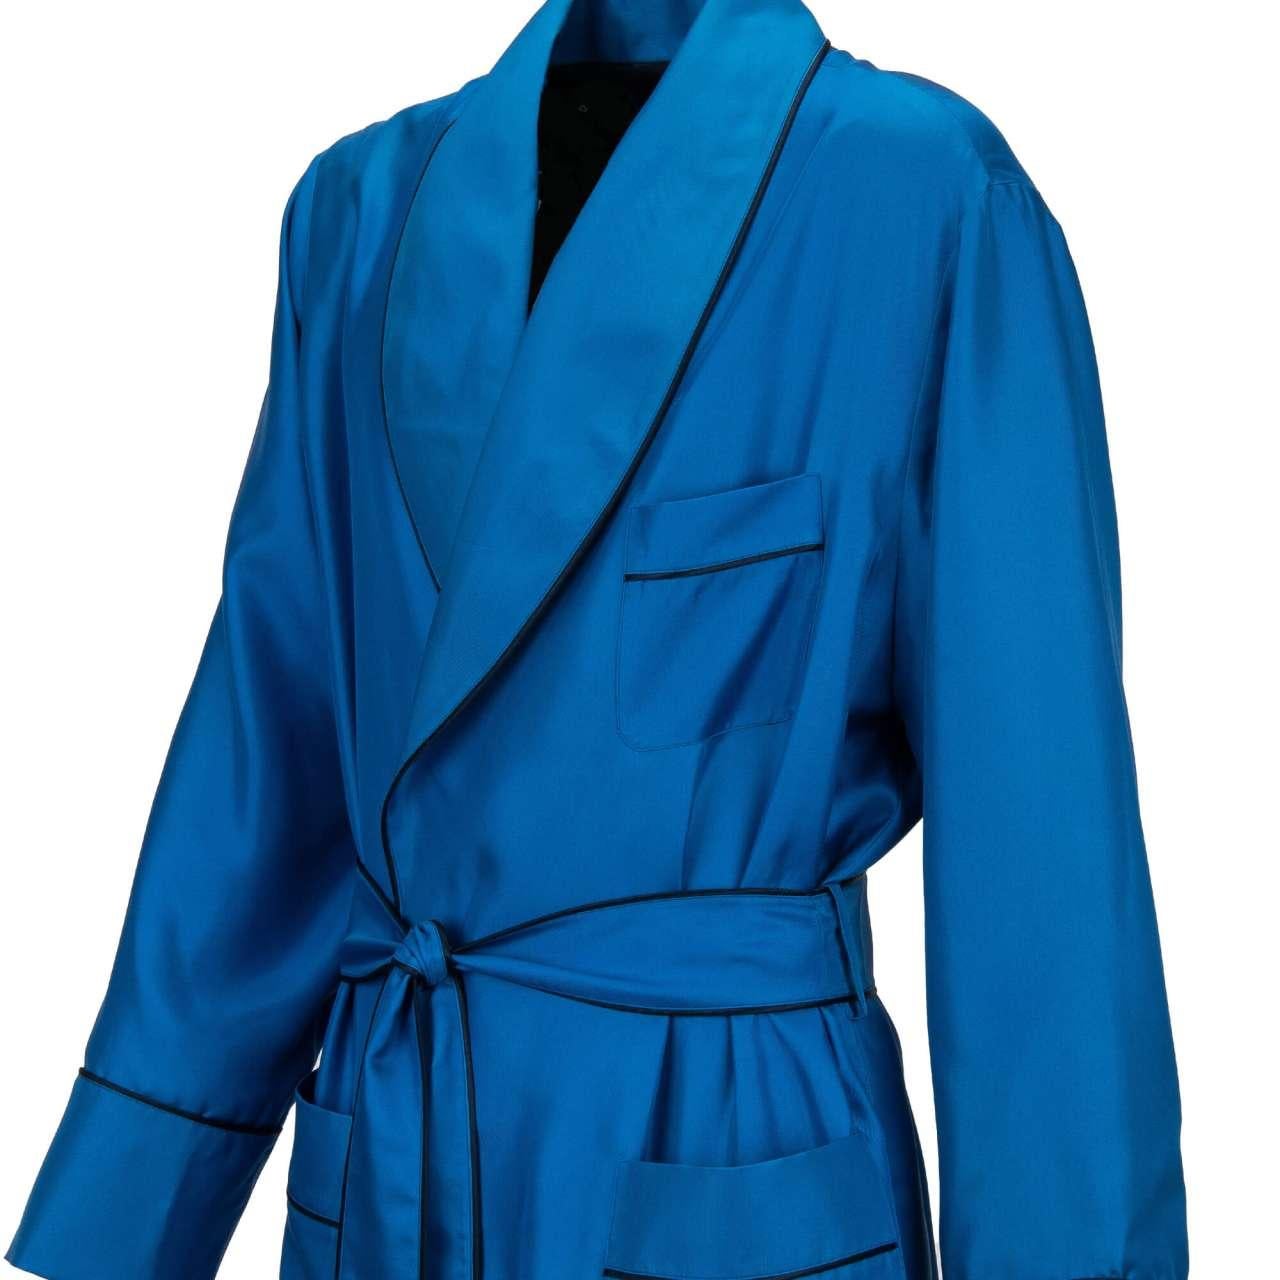 - Silk Coat / Robe with black edges and large shawl collar and pockets in blue by DOLCE & GABBANA - RUNWAY: Dolce&Gabbana Fashion Show - New with tag - Former RRP: EUR 1,950 - MADE IN ITALY - Classic Fit - Model: G0936T-FU1S4-B0322 - Material: 100%